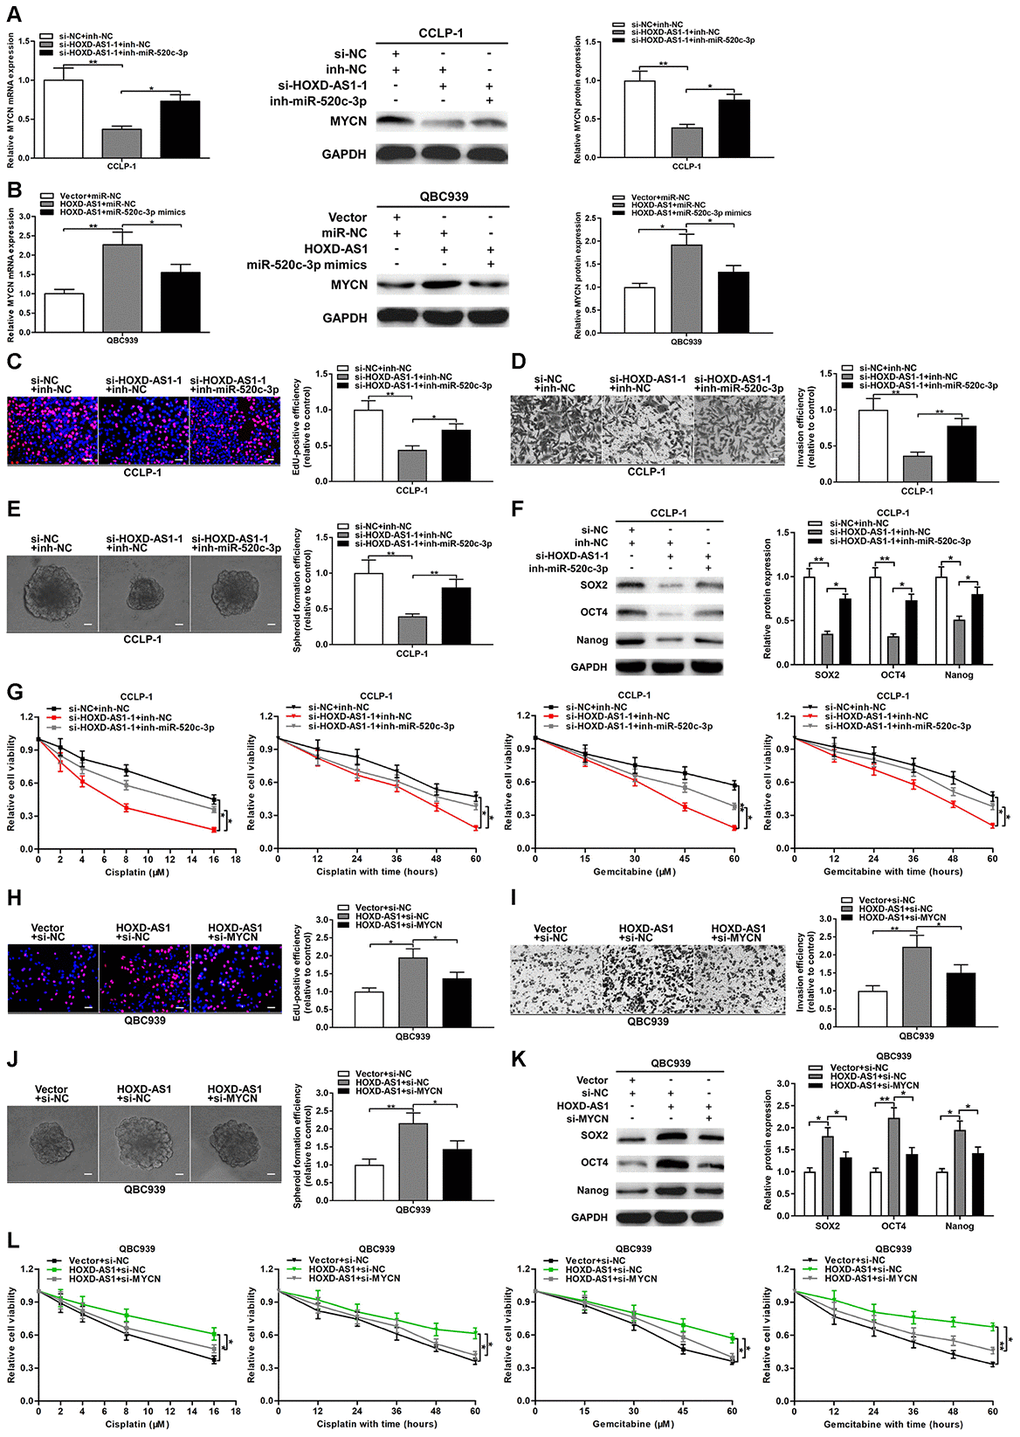 HOXD-AS1 boosted malignant progression of CCA through mediating miR-520c-3p/MYCN. (A) MYCN downexpression caused by HOXD-AS1 knockdown was saved by silencing miR-520c-3p. (B) MYCN overexpression caused by HOXD-AS1 amplification was saved by increasing miR-520c-3p. (C–G) Rescue assays of EdU, transwell, spheroid formation, stem marker analysis and chemo-resistance certified that inhibition of proliferation, invasion, stemness maintenance and chemo-resistance induced by knocking down HOXD-AS1 was retrieved through silencing miR-520c-3p in CCLP-1 cells, respectively. (H–L) Restoration of MYCN expression rescued the promotion of proliferation, invasion, stemness maintenance and chemo-resistance generated through HOXD-AS1 amplification in EdU, transwell, spheroid formation, stem marker analysis and chemo-resistance assays, respectively. *P **P 